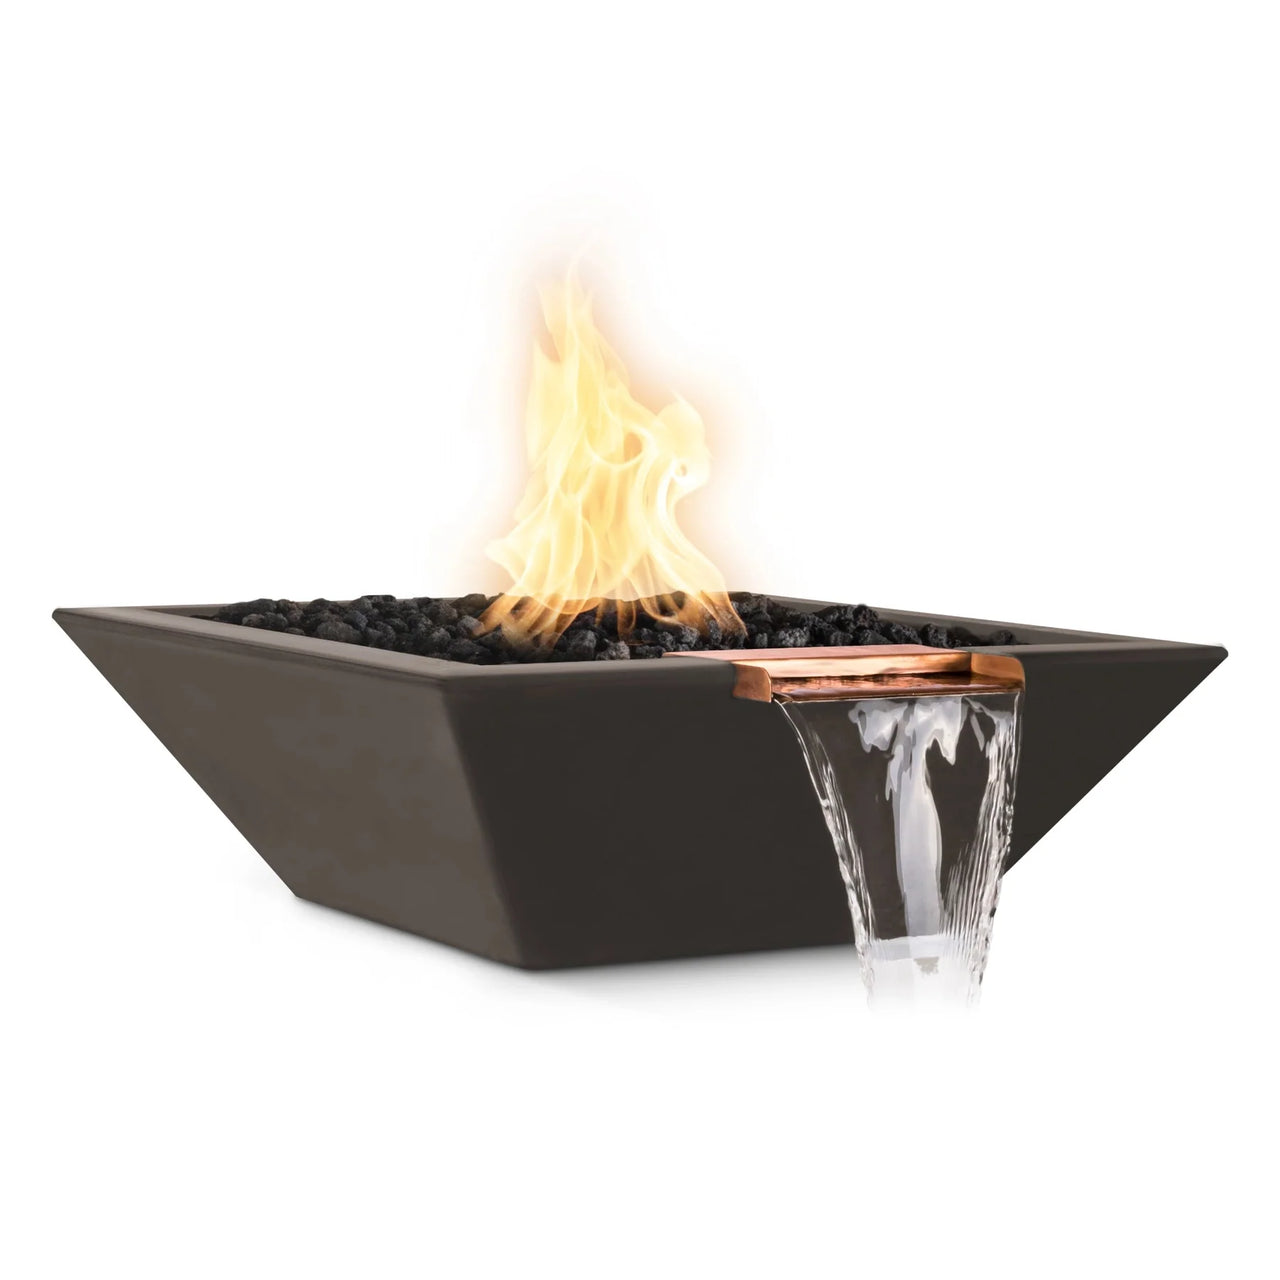 The Outdoor Plus 24" Maya GFRC Square Fire and Water Bowl